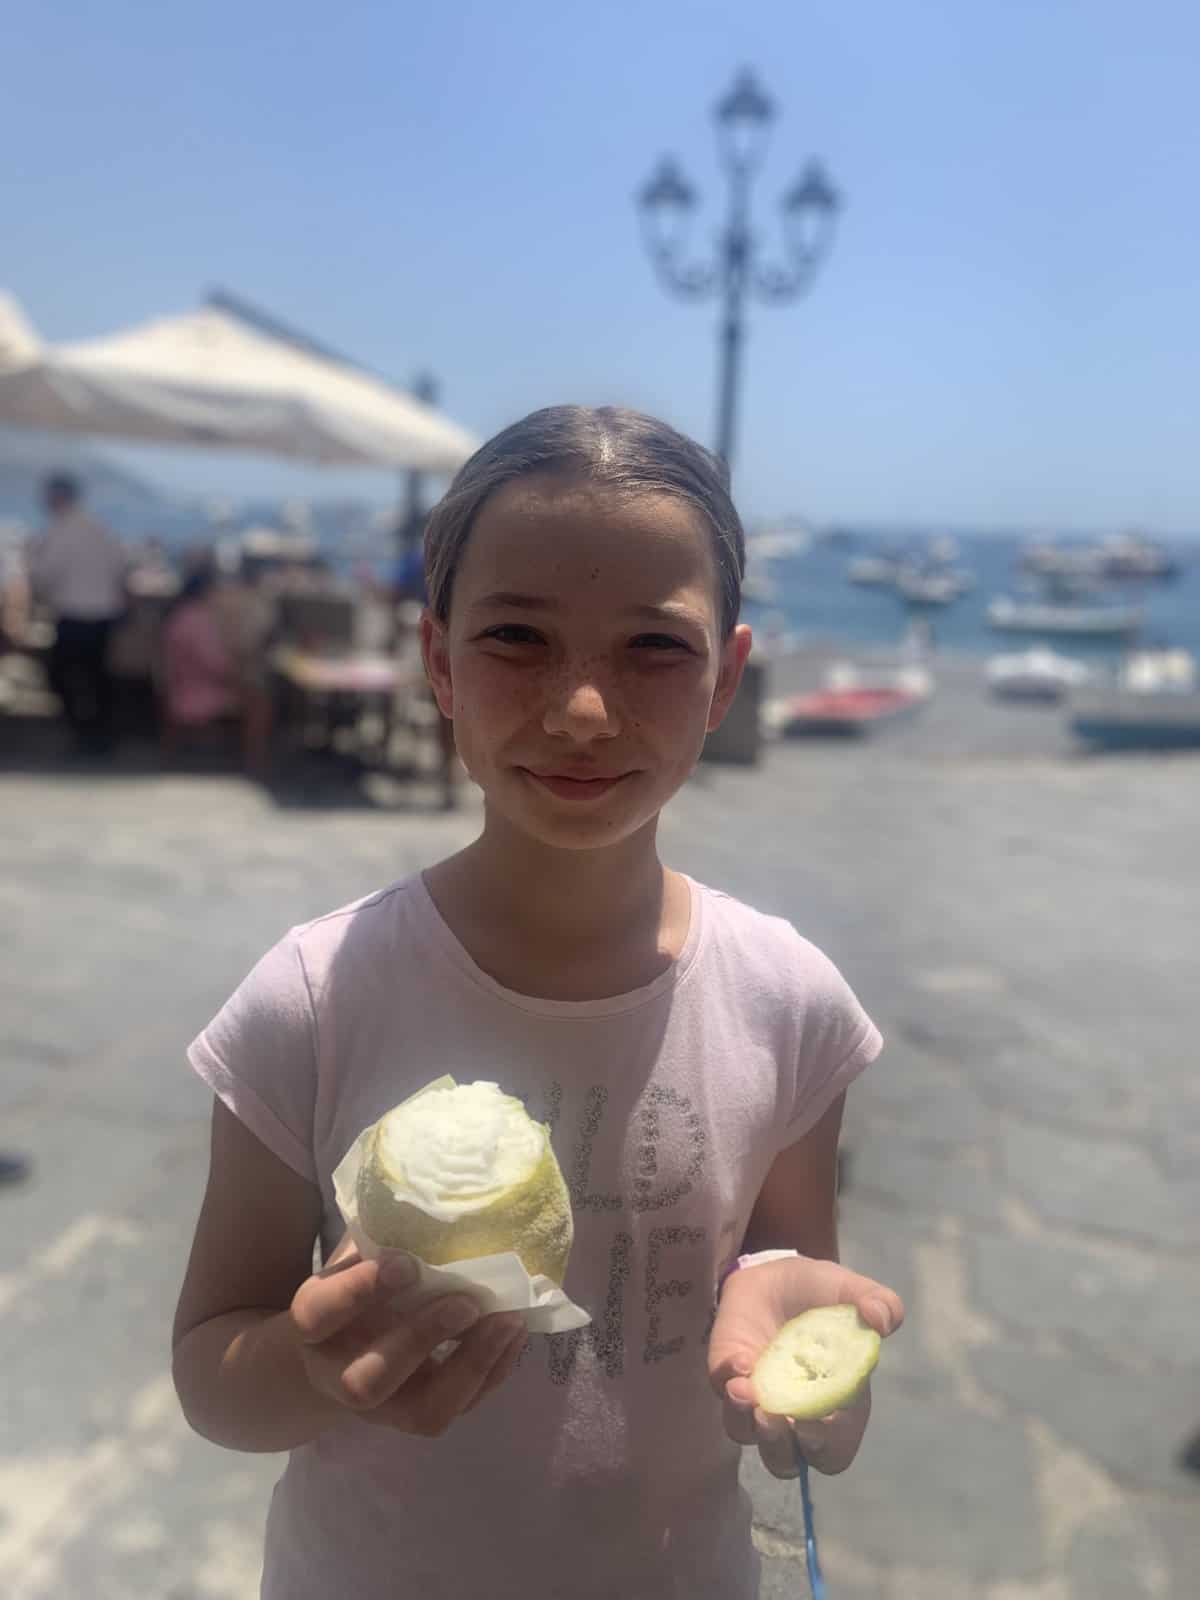 Miss E holding a gluten-free lemon gelato inside a lemon in one hand and the lemon "lid" in the other